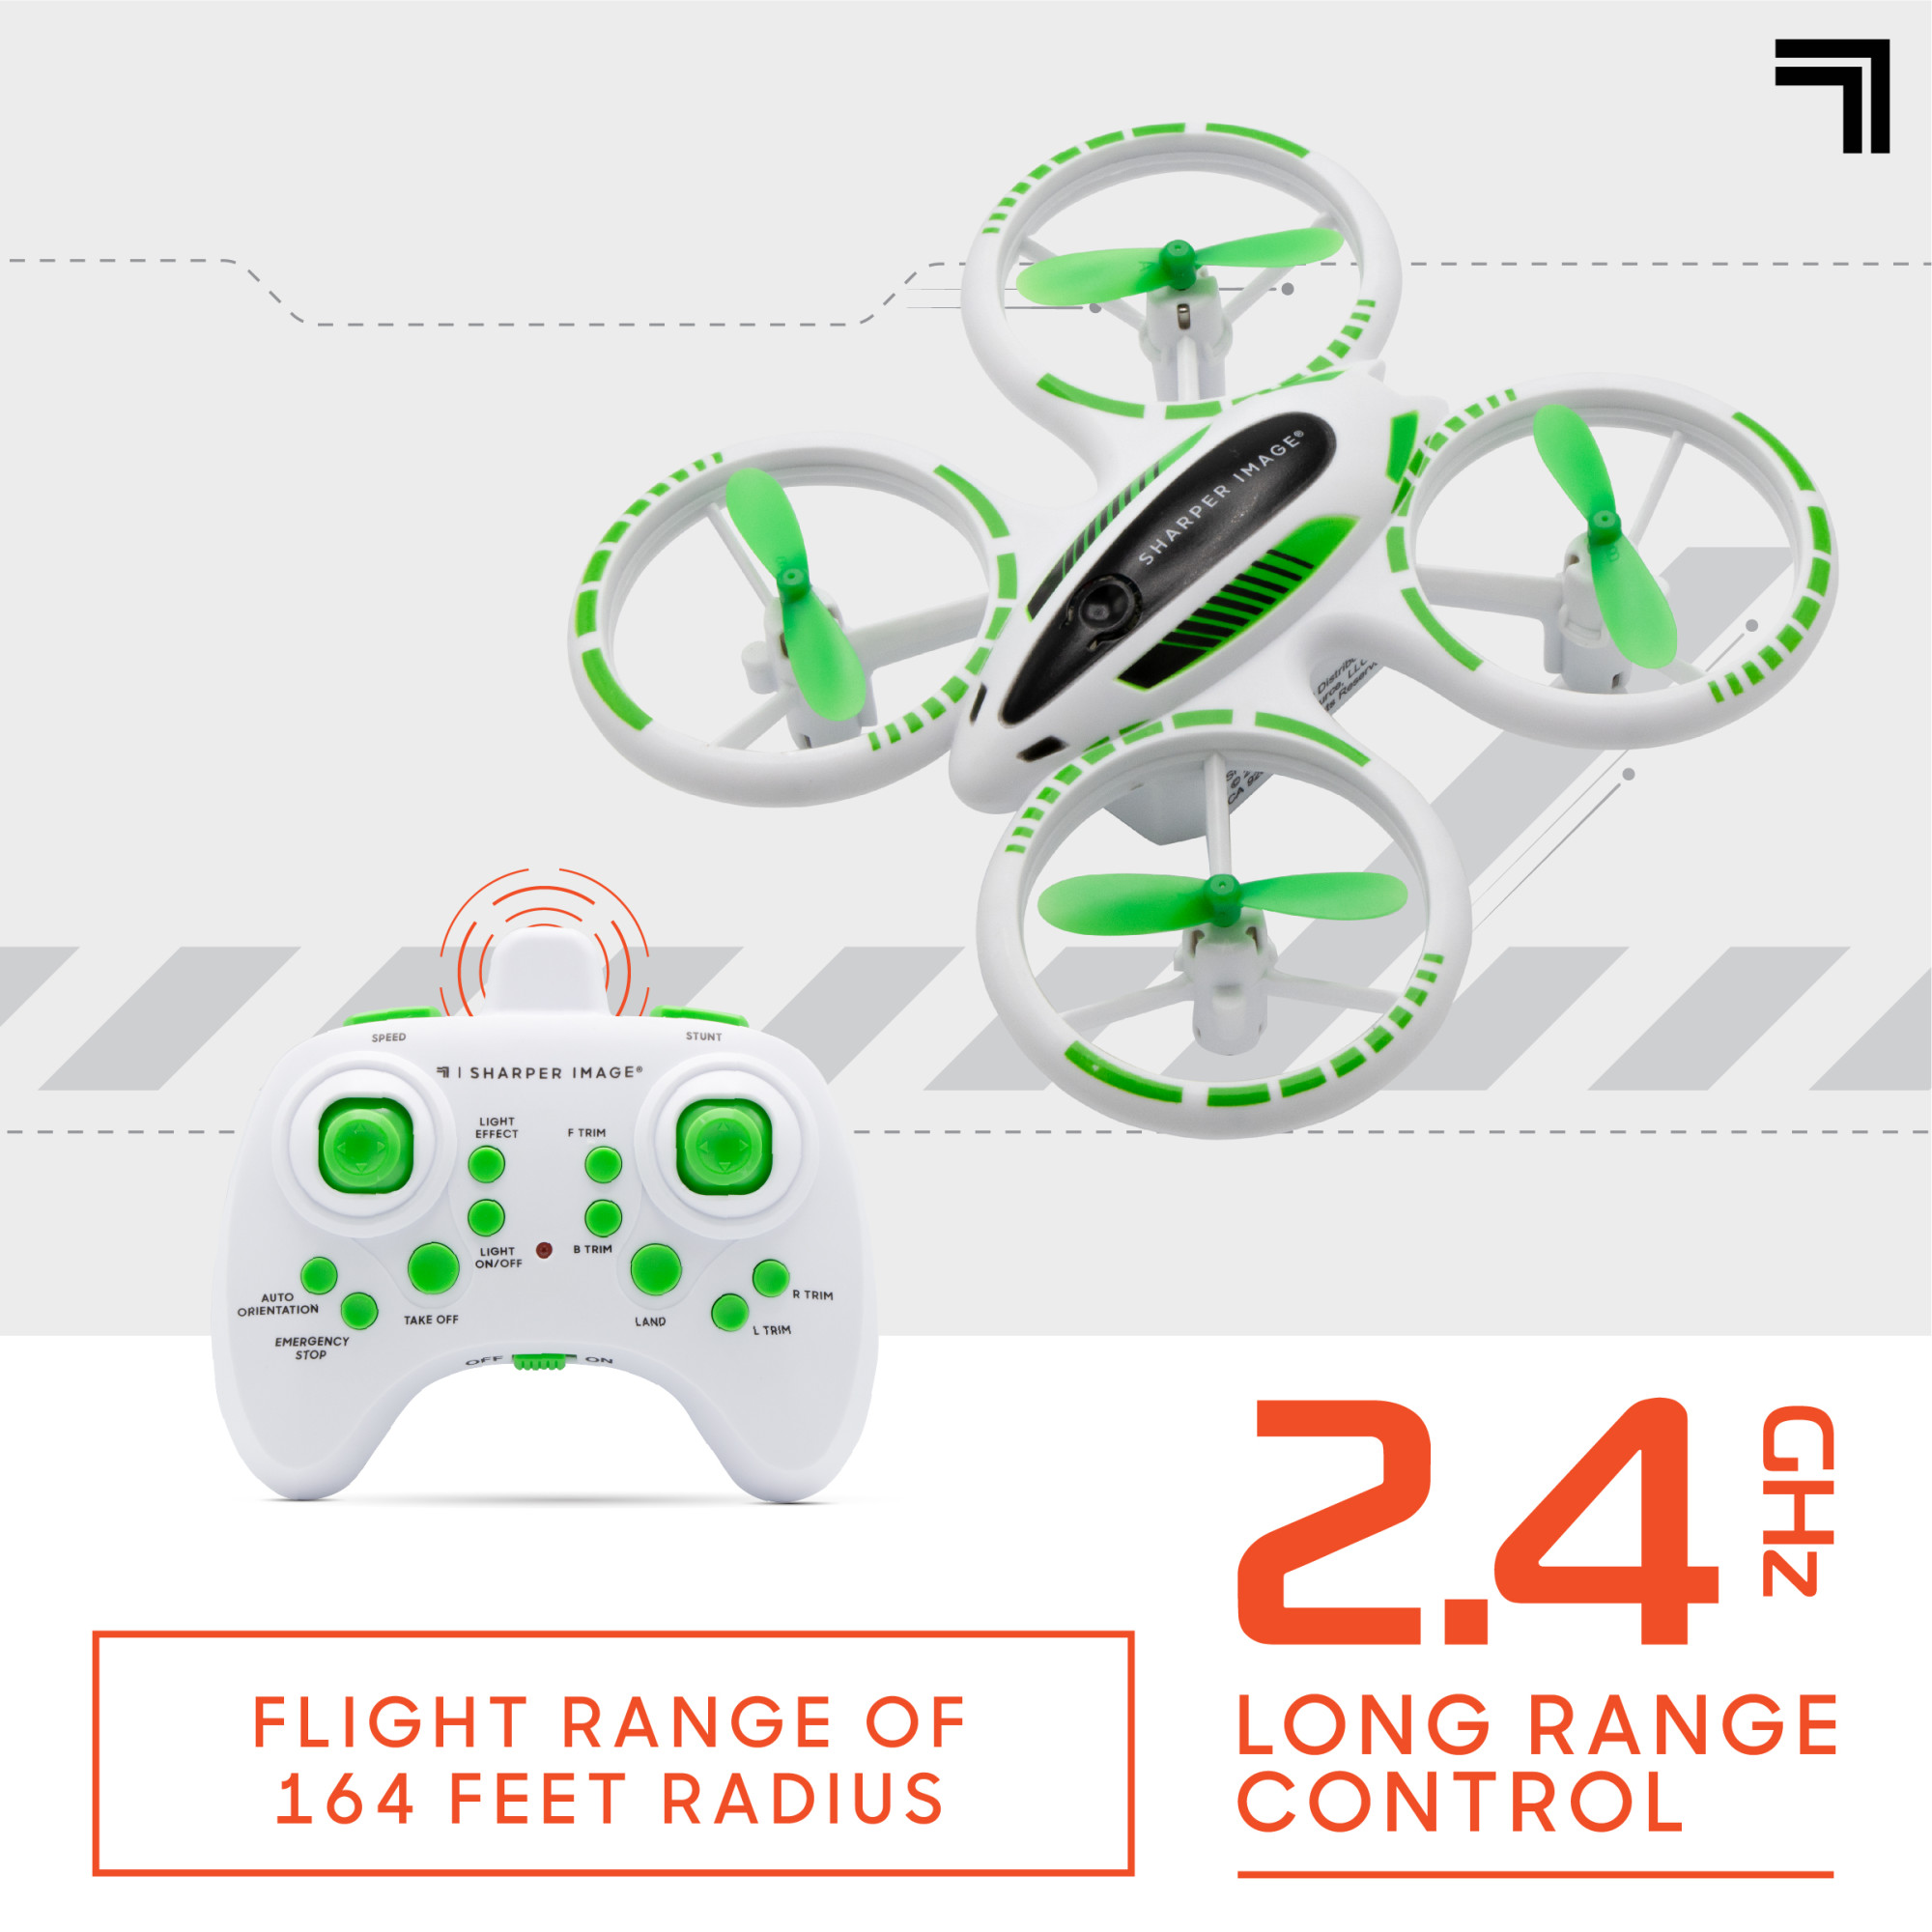 Sharper Image® 2.4GHz RC Glow up Stunt Drone with LED Lights, 8.8 in x 3.5 in - image 4 of 11